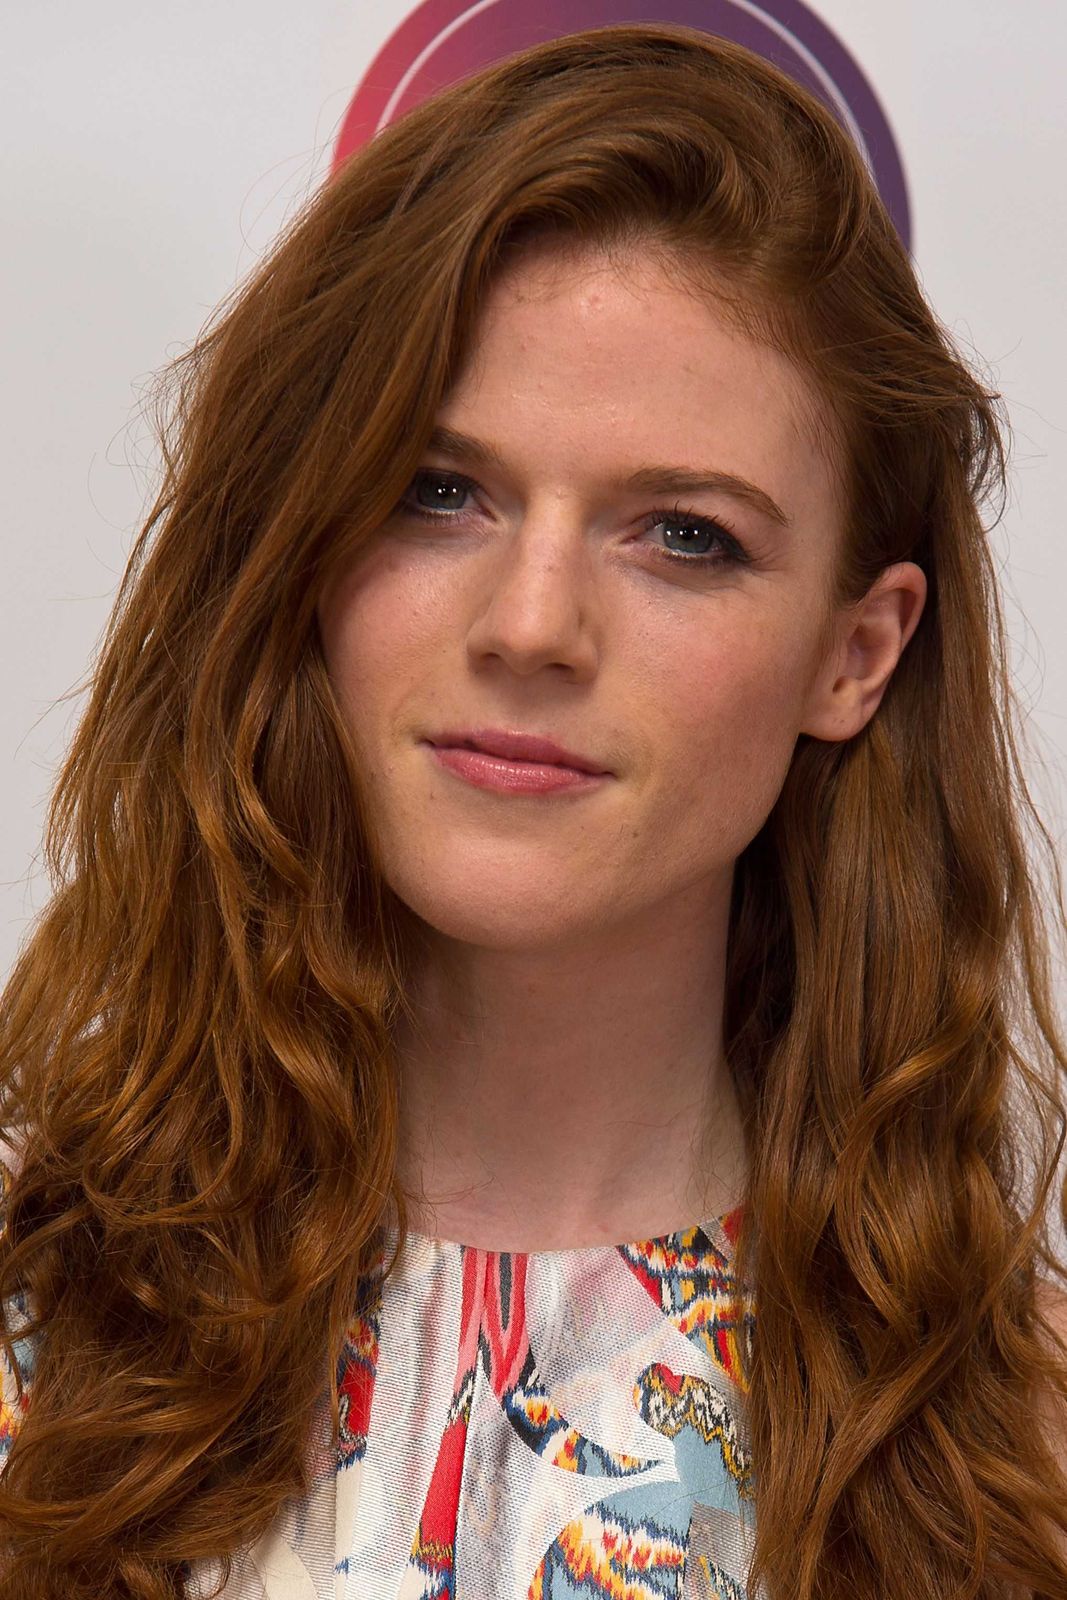 'He’s about to get the shock of his life': Rose Leslie and Kit Harington announce second baby on the way